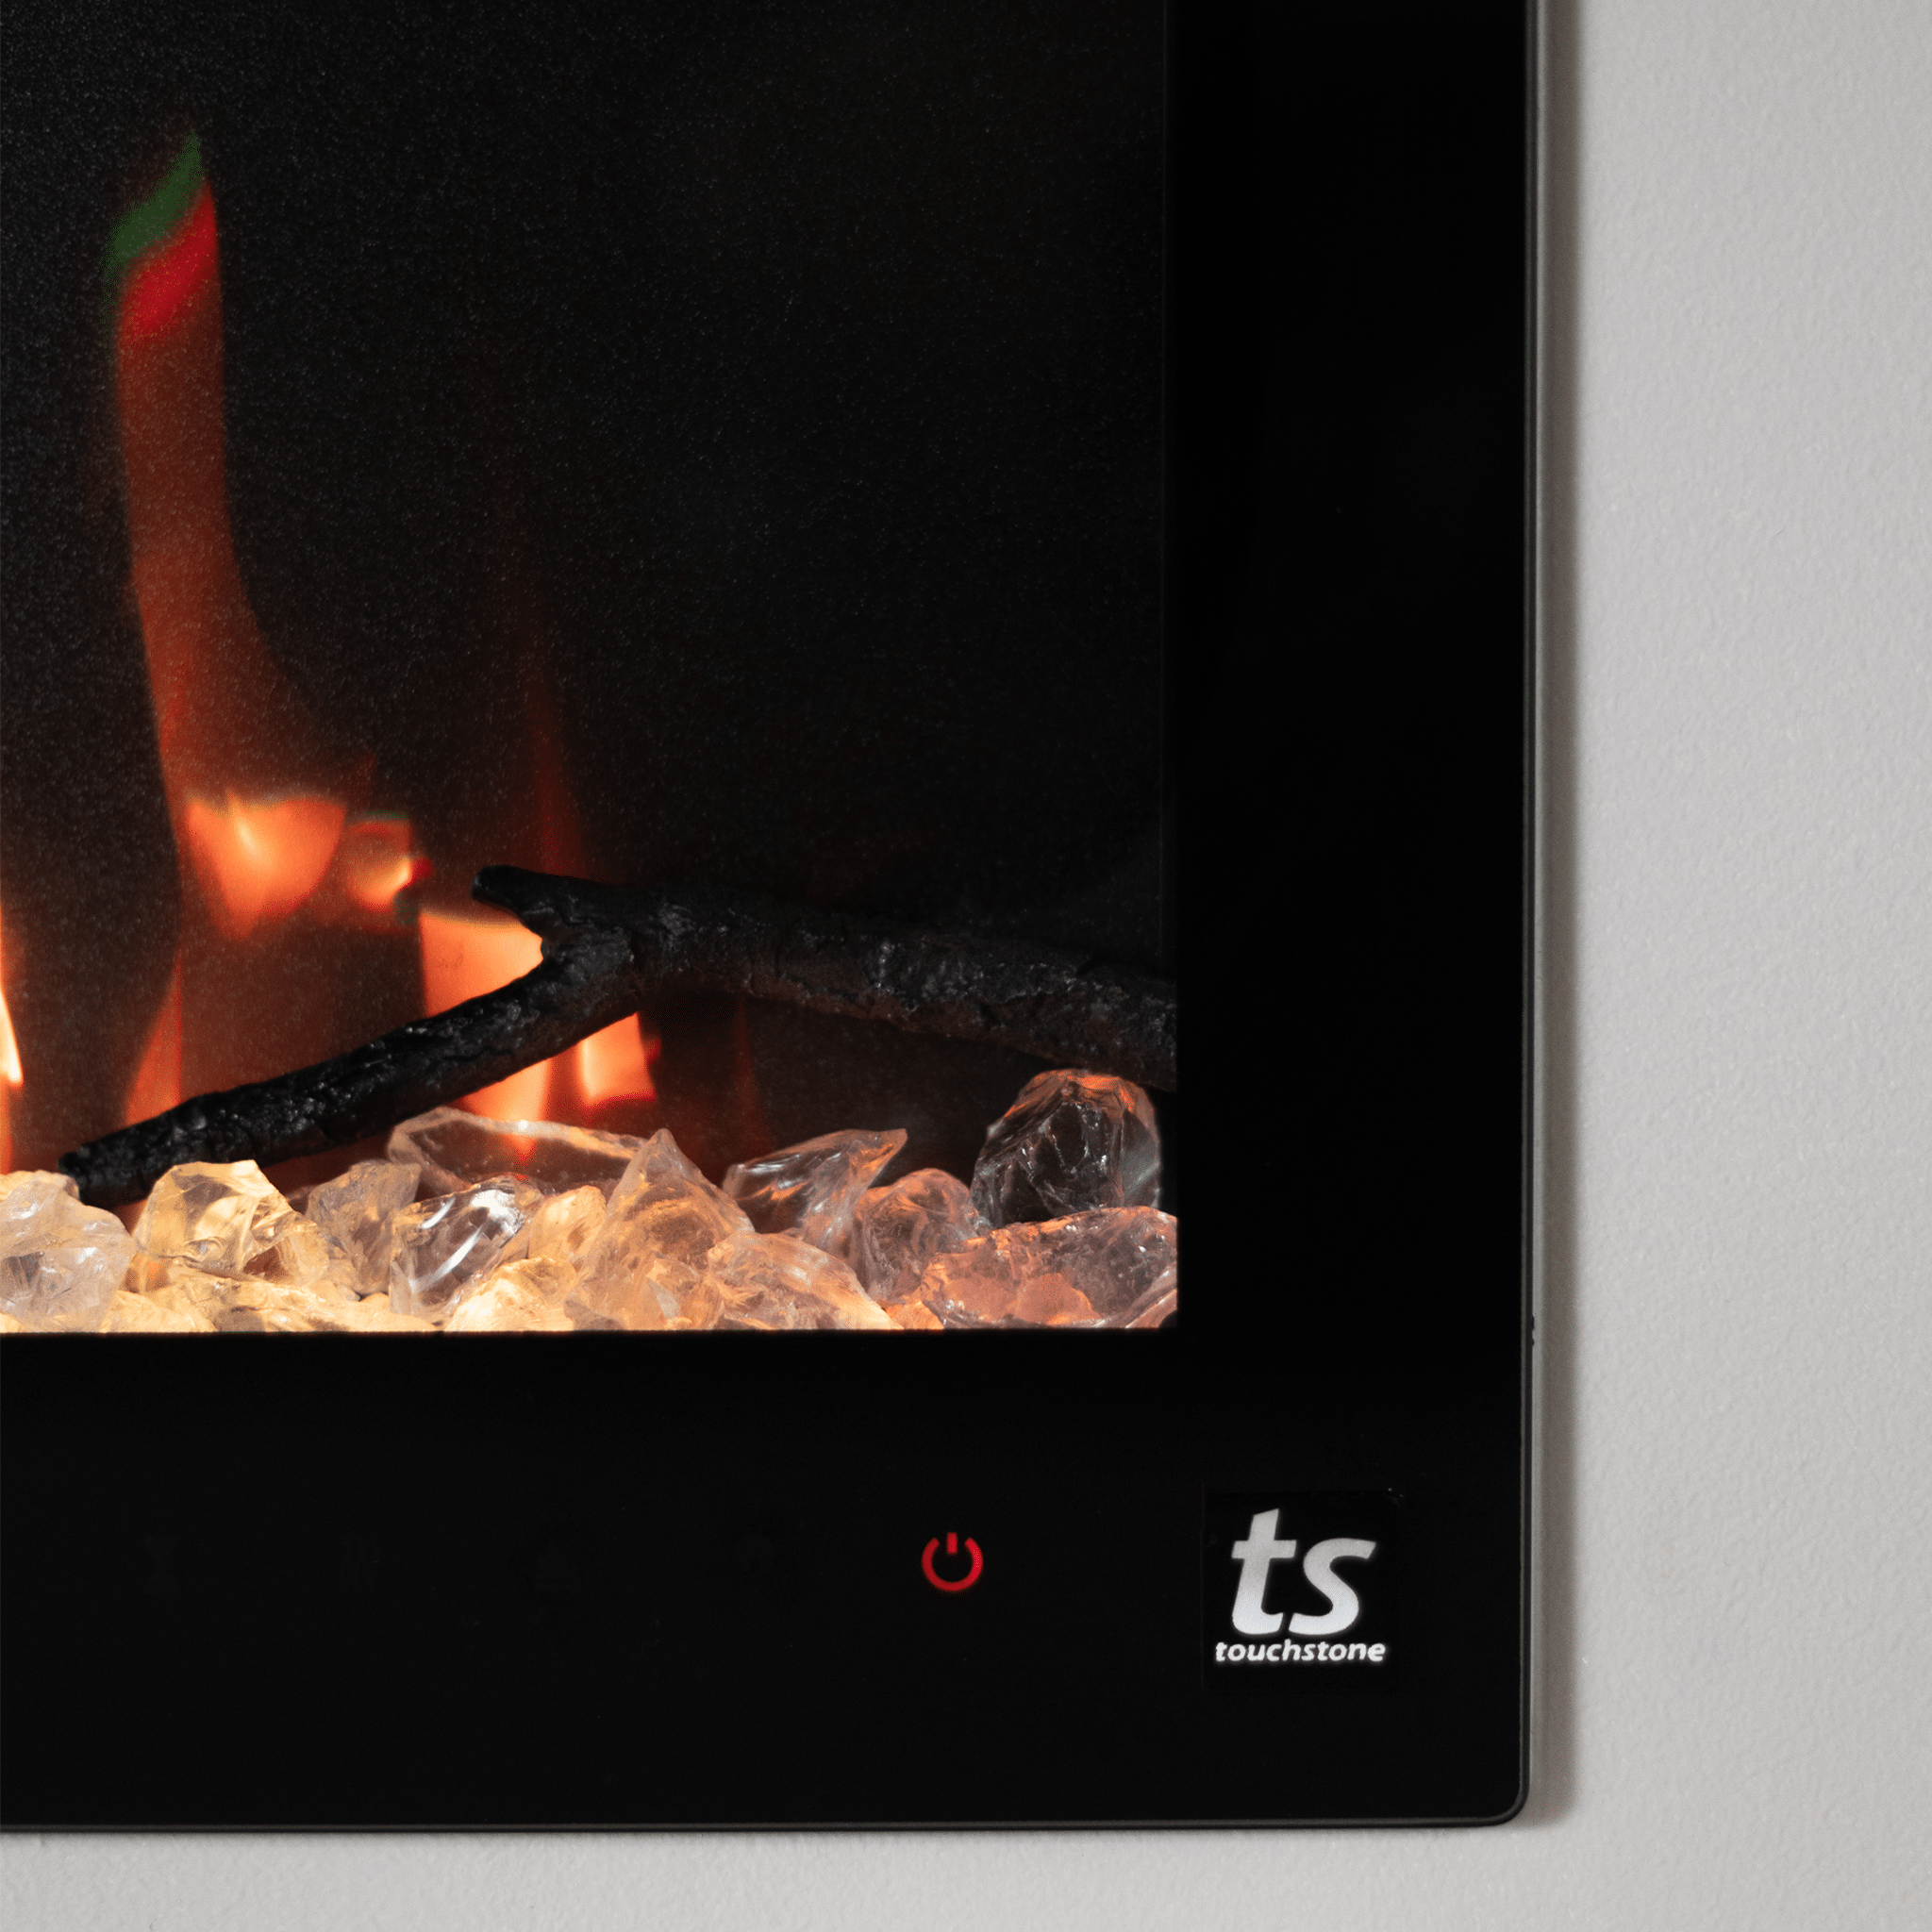 Sideline Fury 65 Inch Electric Fireplace close up shot